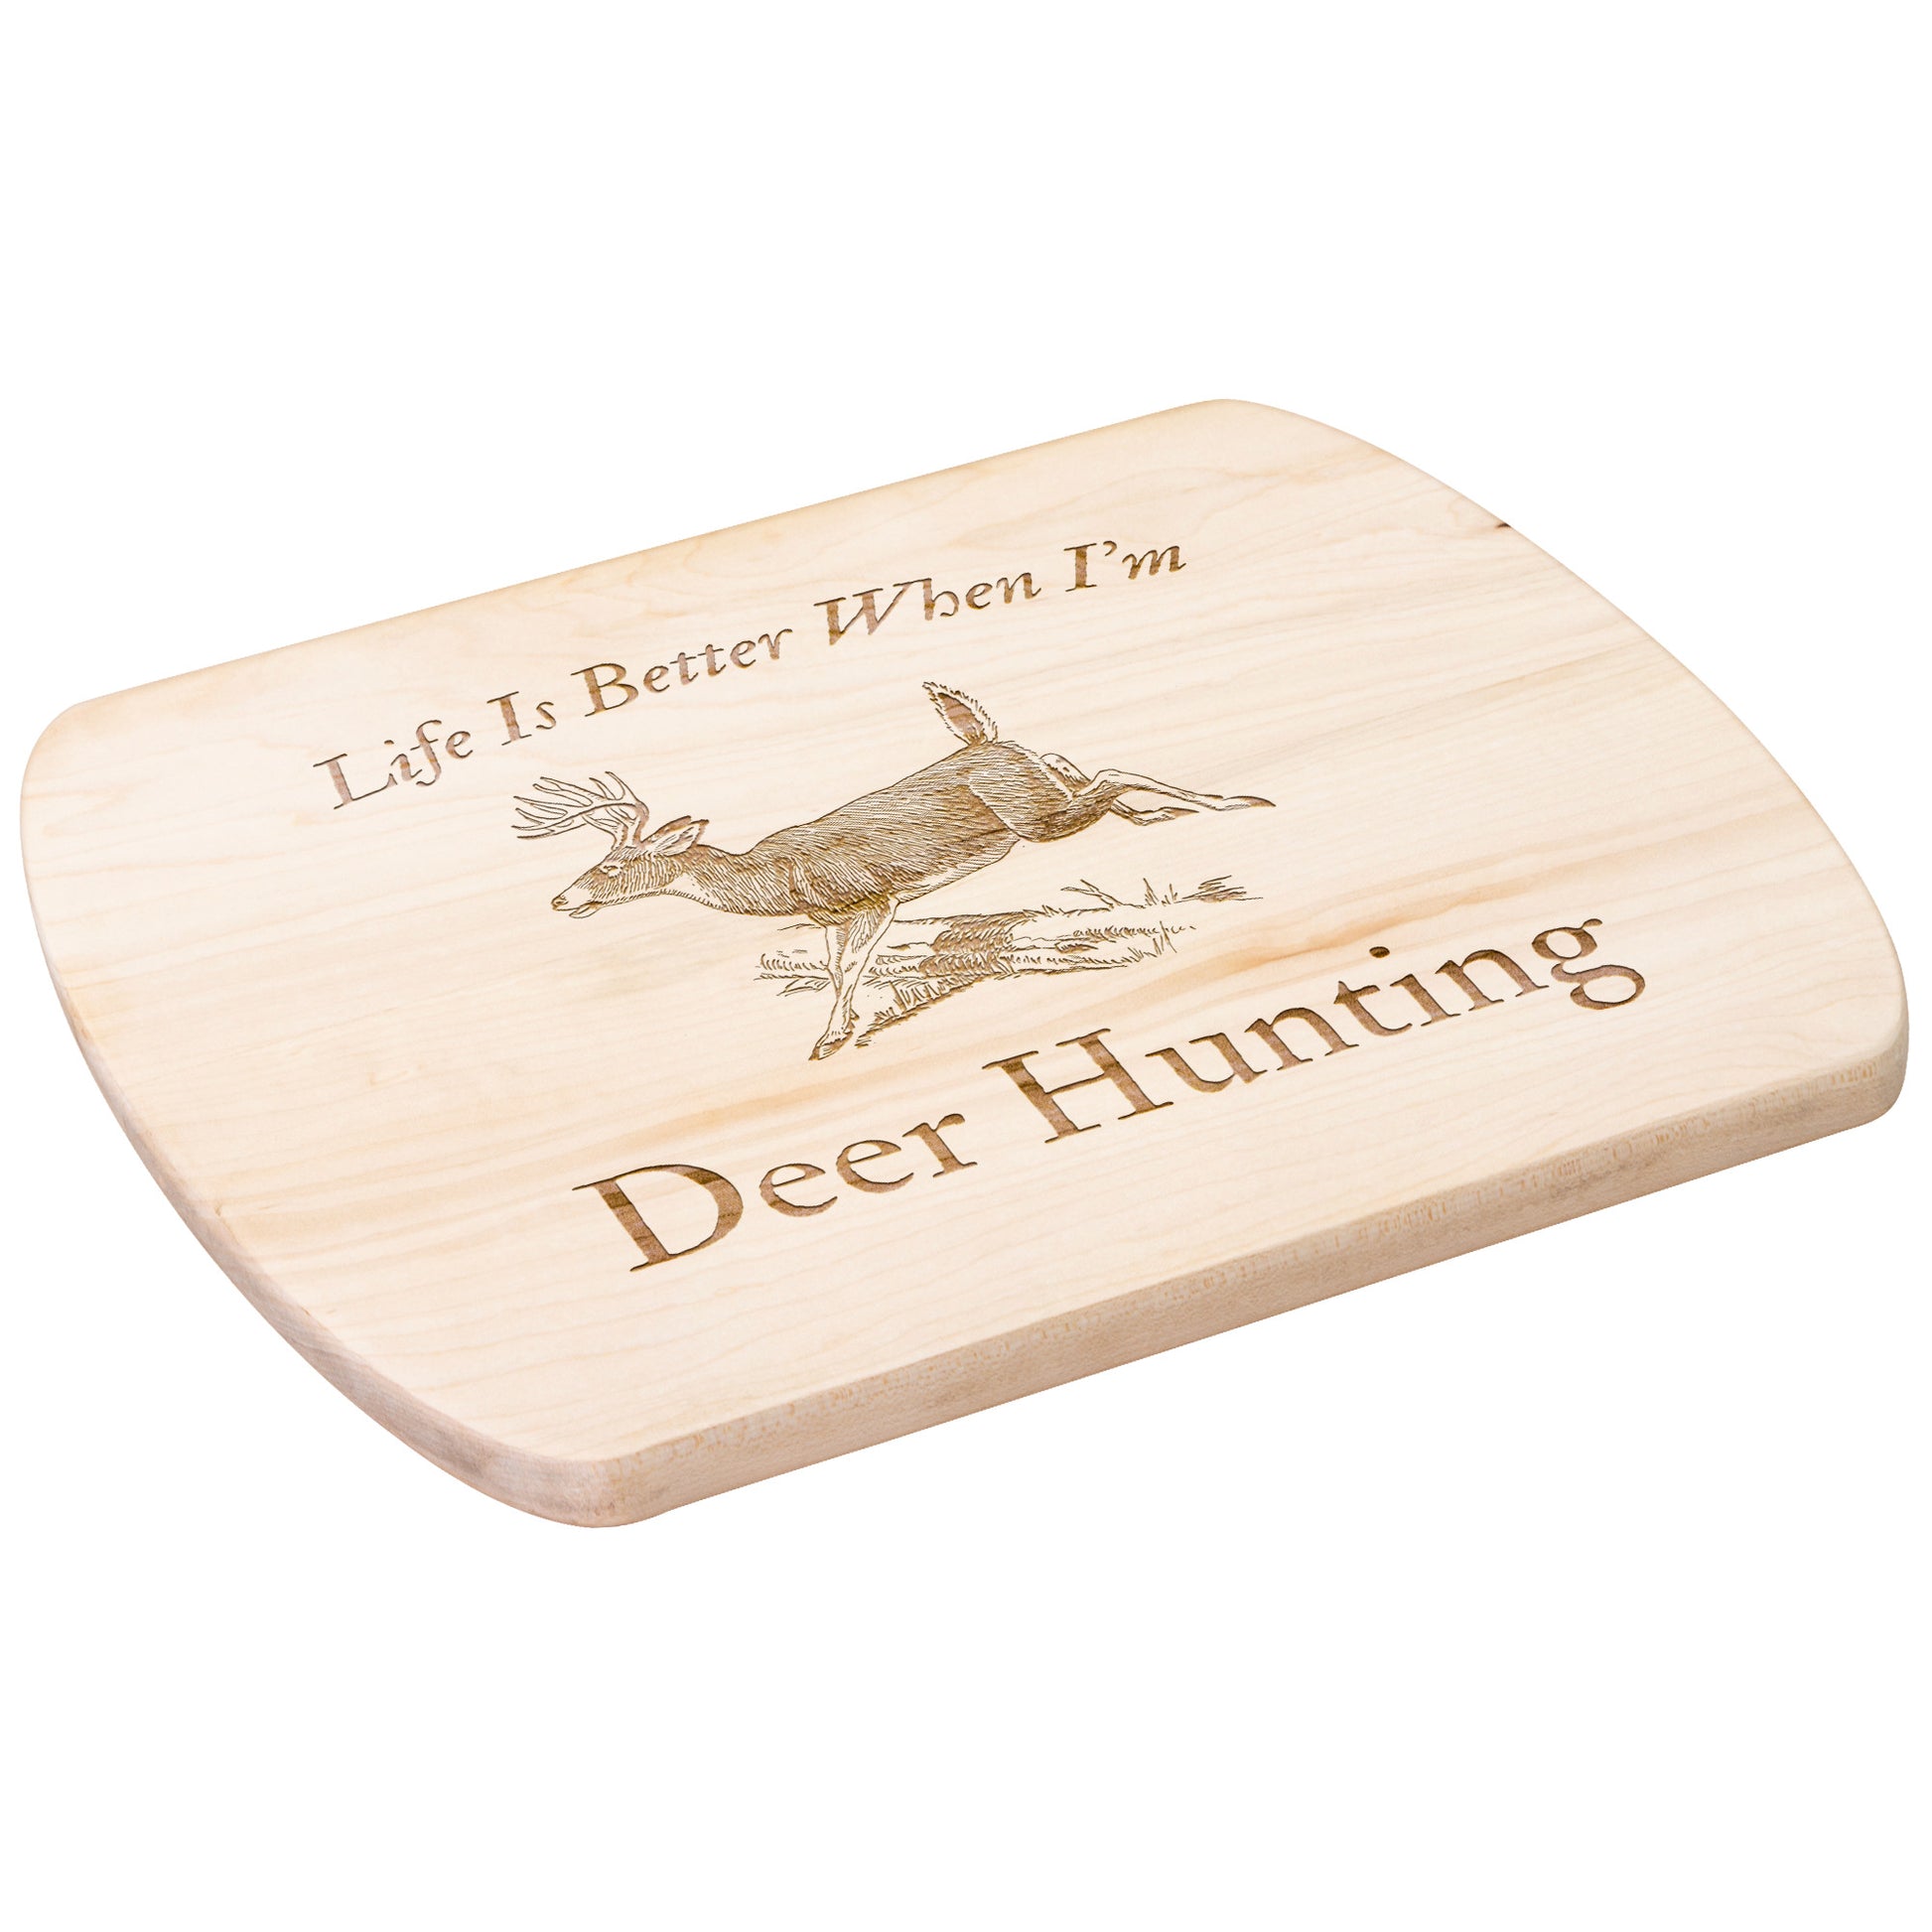 "Life Is Better When I'm Deer Hunting" Hardwood Cutting Board - Weave Got Gifts - Unique Gifts You Won’t Find Anywhere Else!